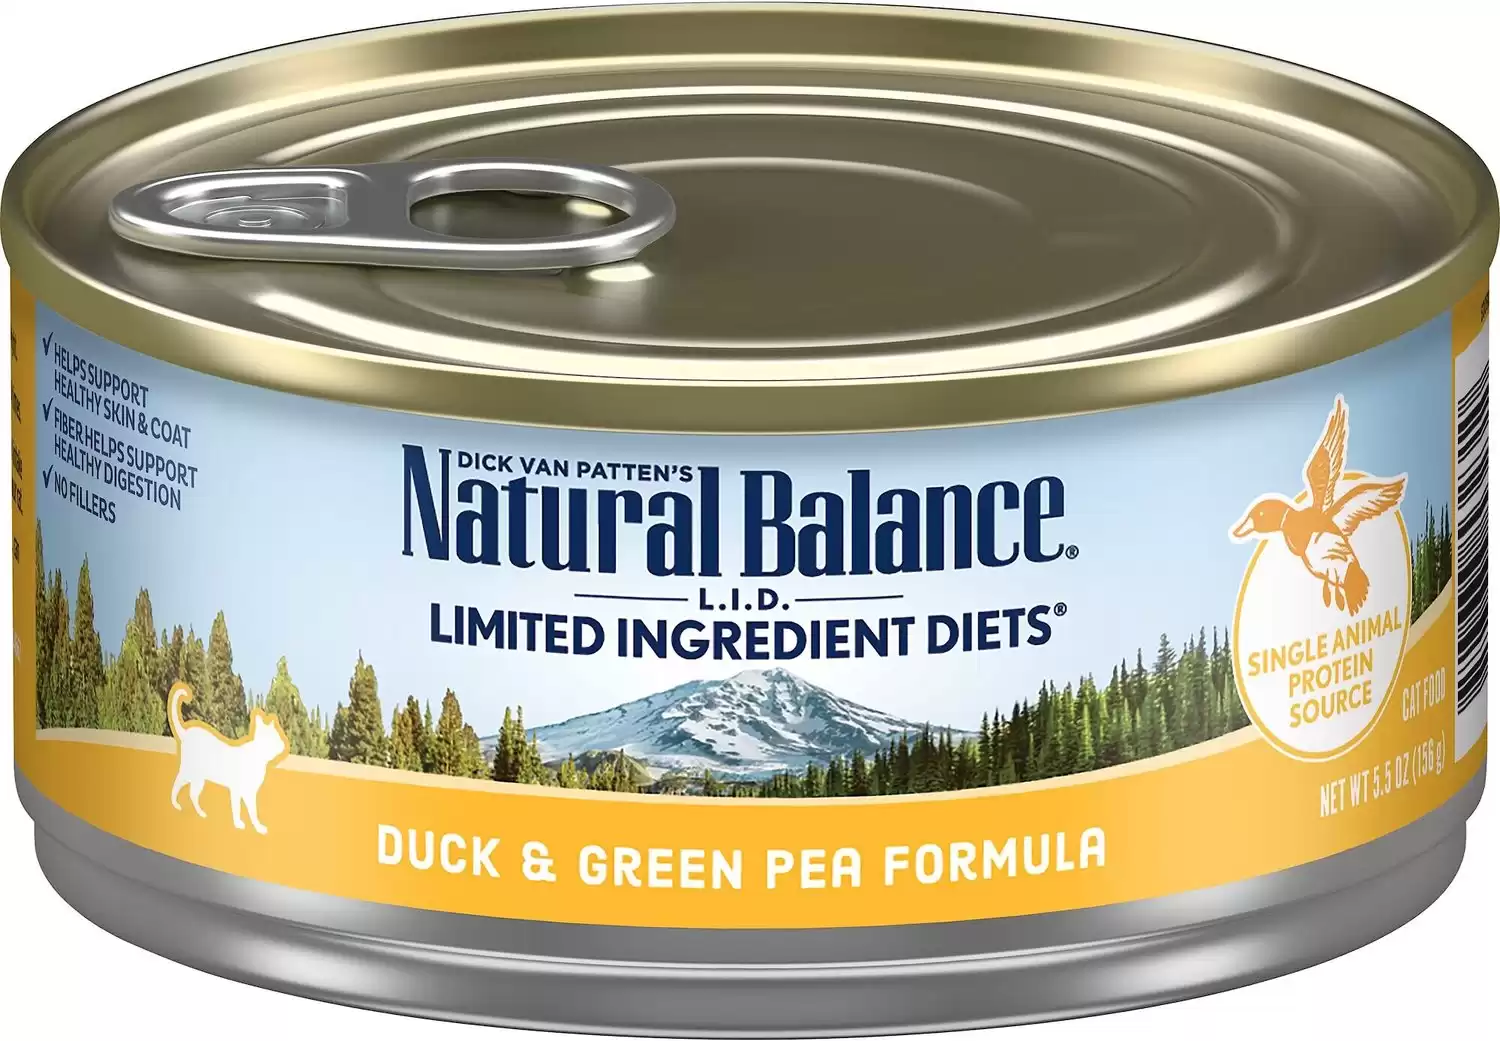 Natural Balance Limited Ingredient Diets Duck & Green Pea Grain-Free Canned Cat Food